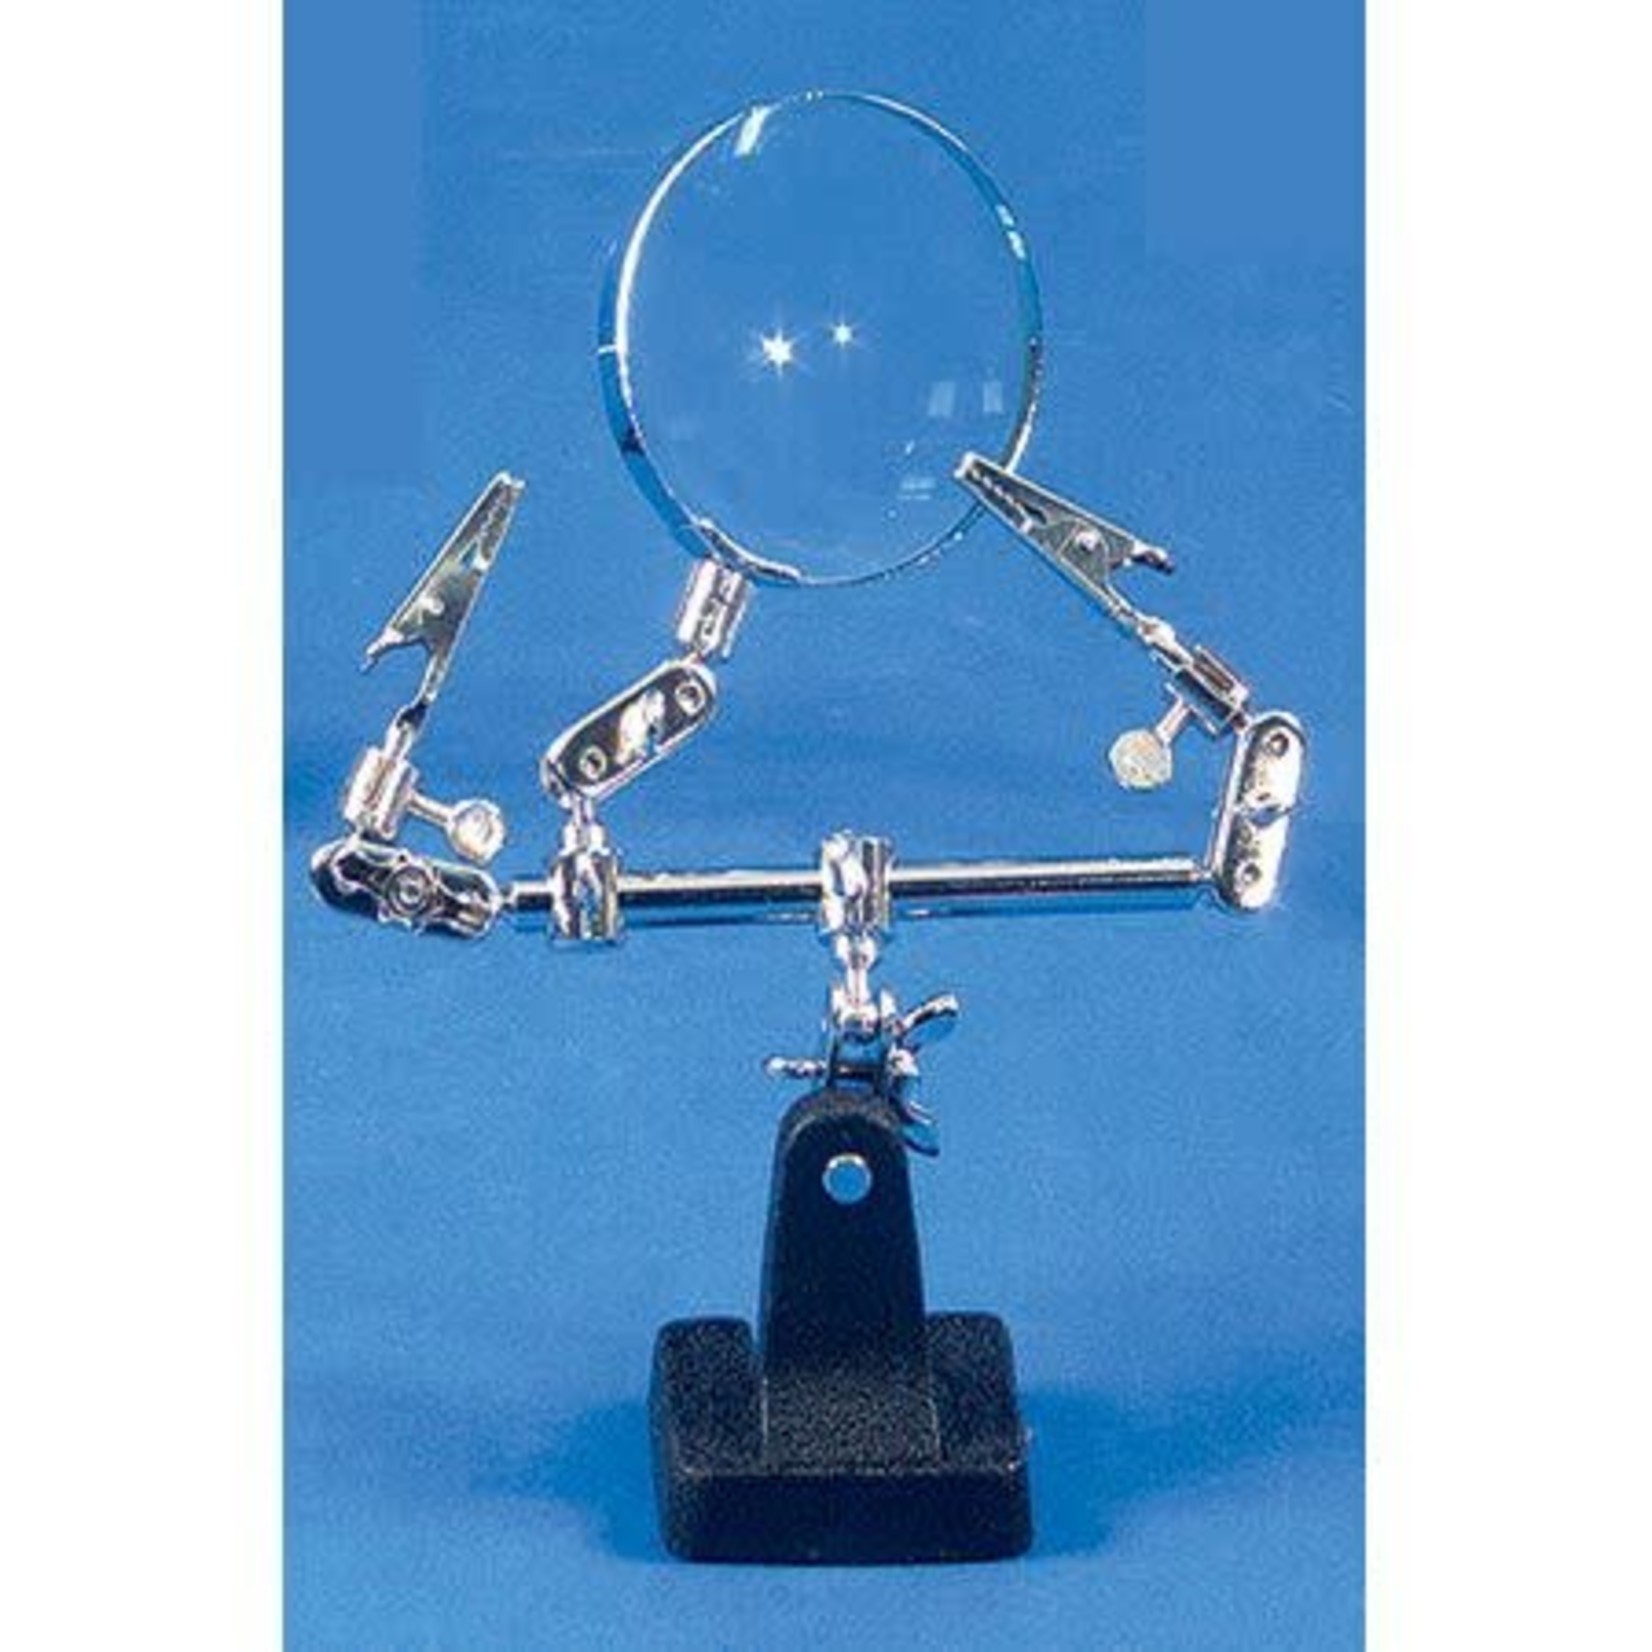 Extra Hands with Magnifier